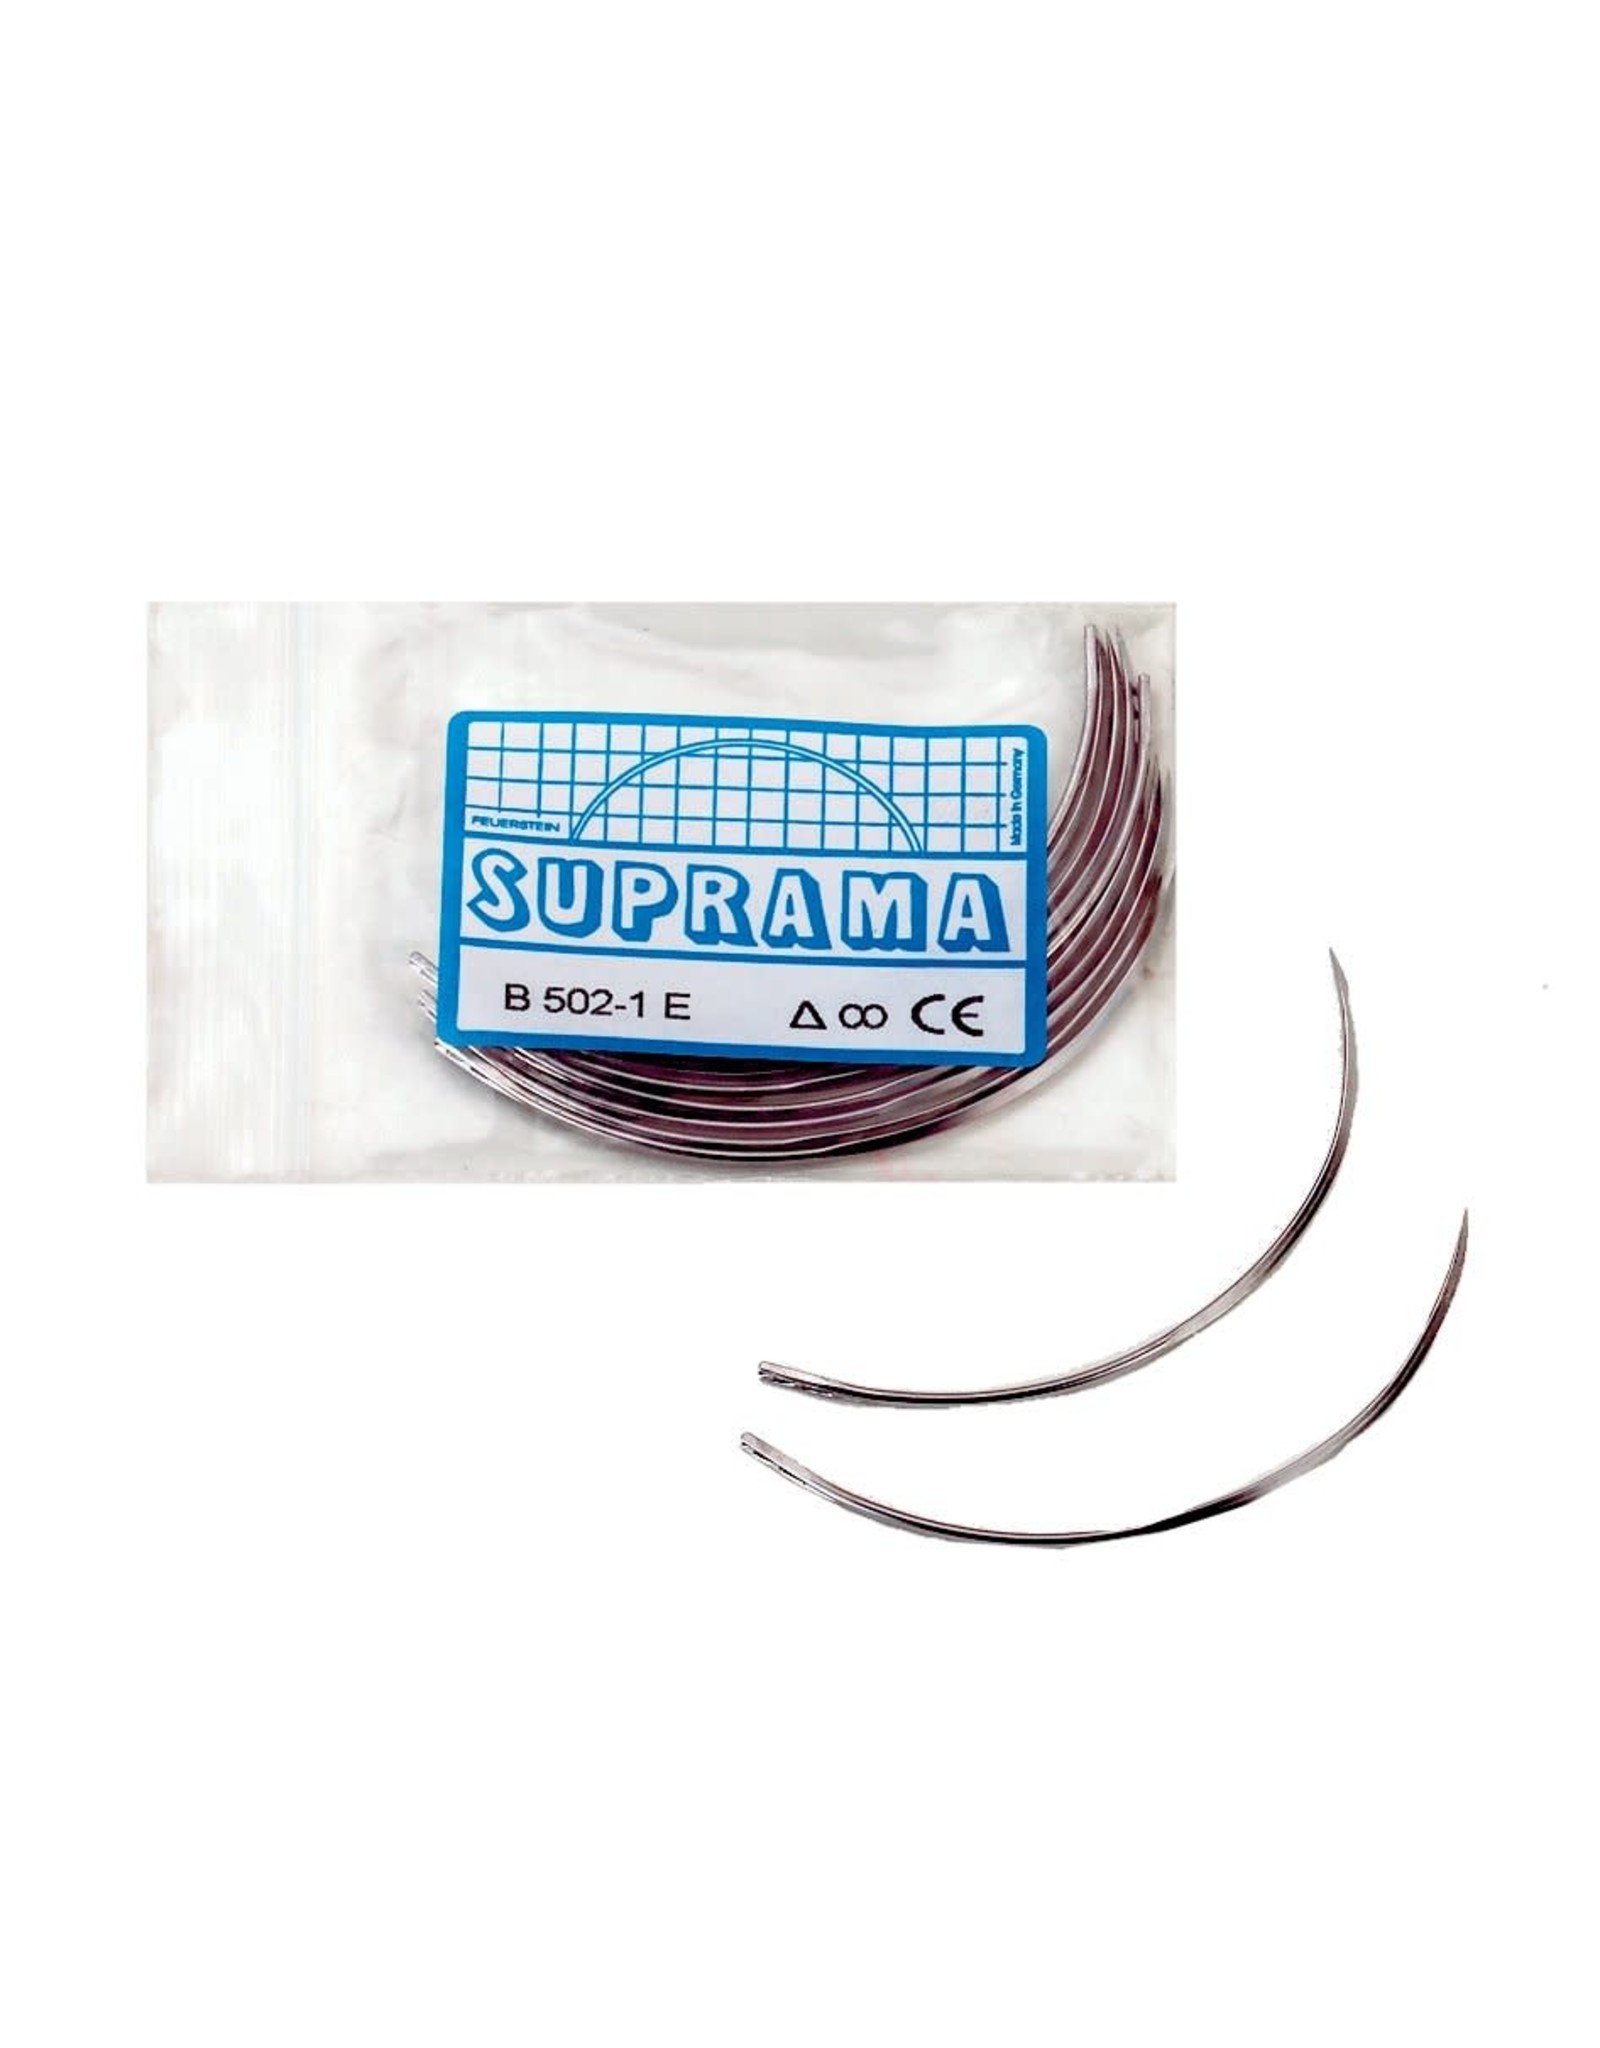 Suture Needle 3/8 Circle 2.75 in.   376-837